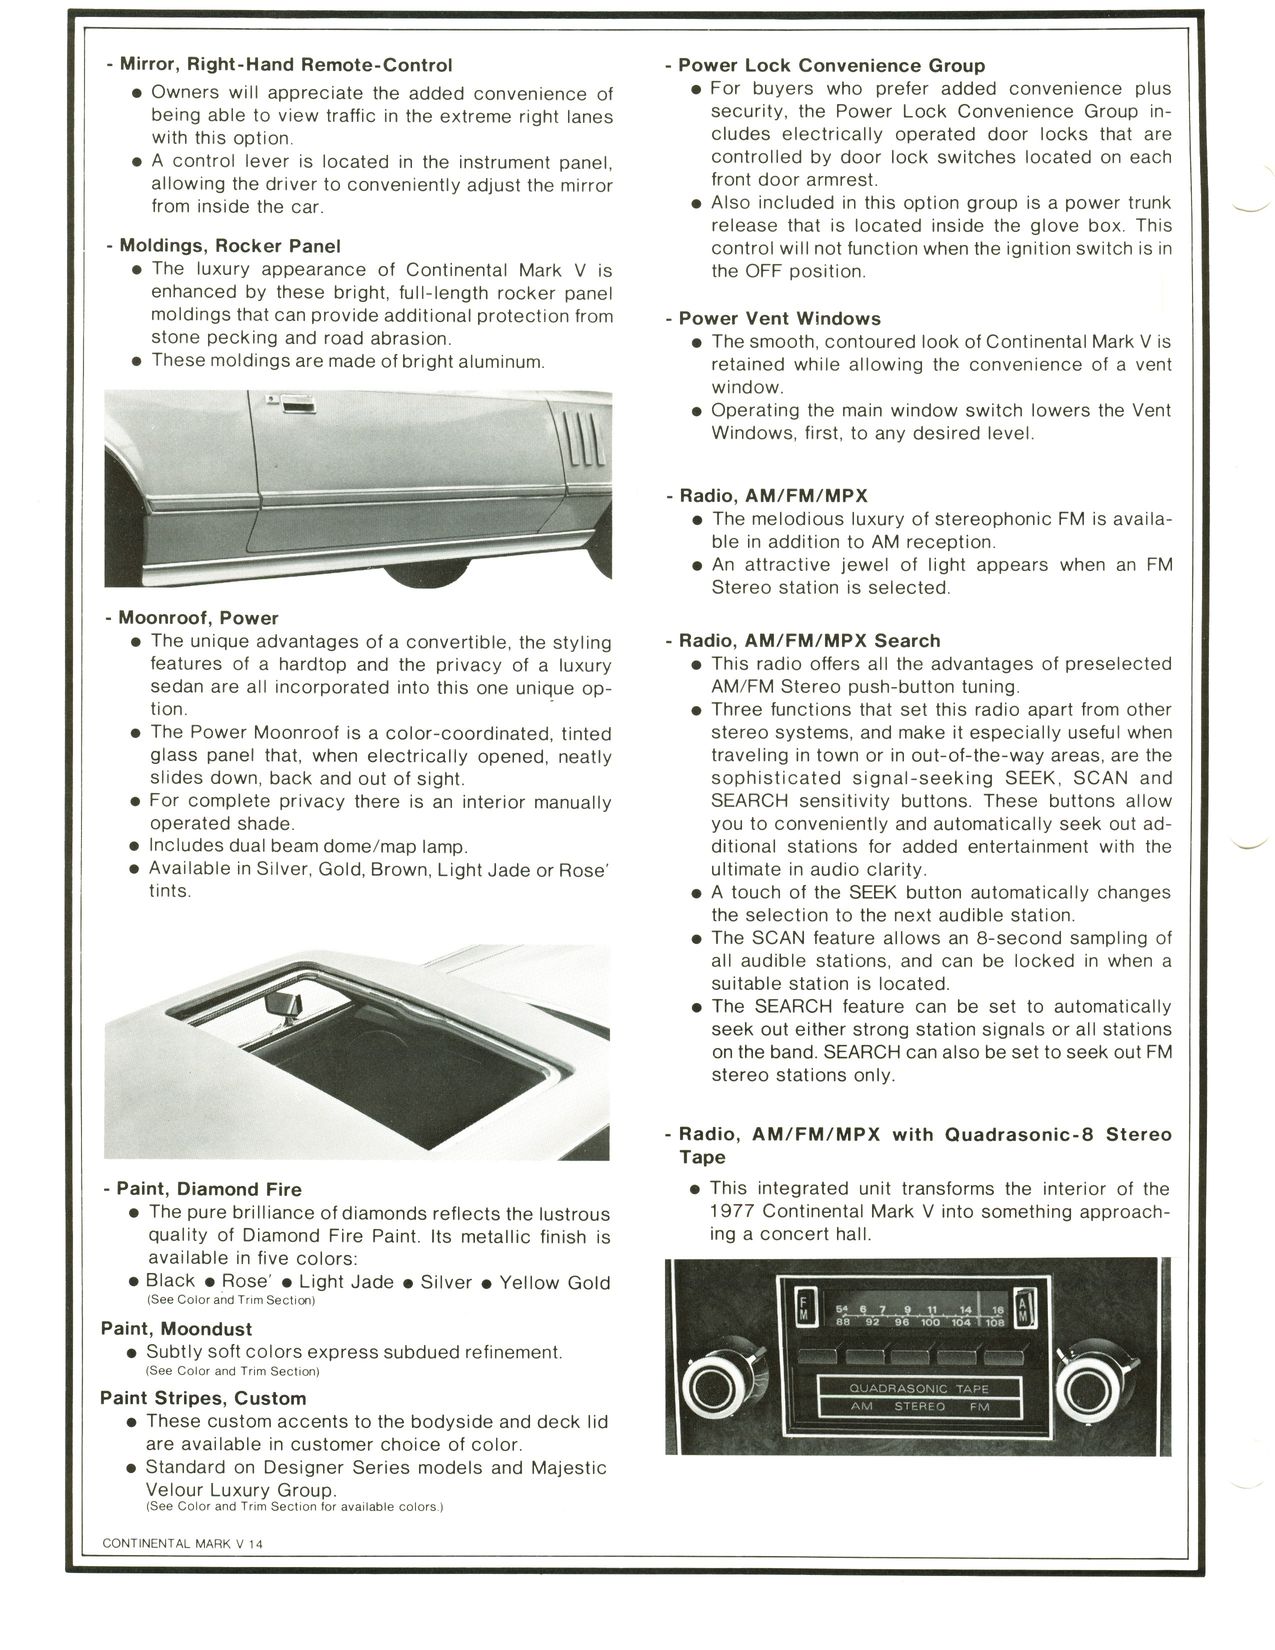 1977 Lincoln Continental Mark V Product Facts Book Page 17